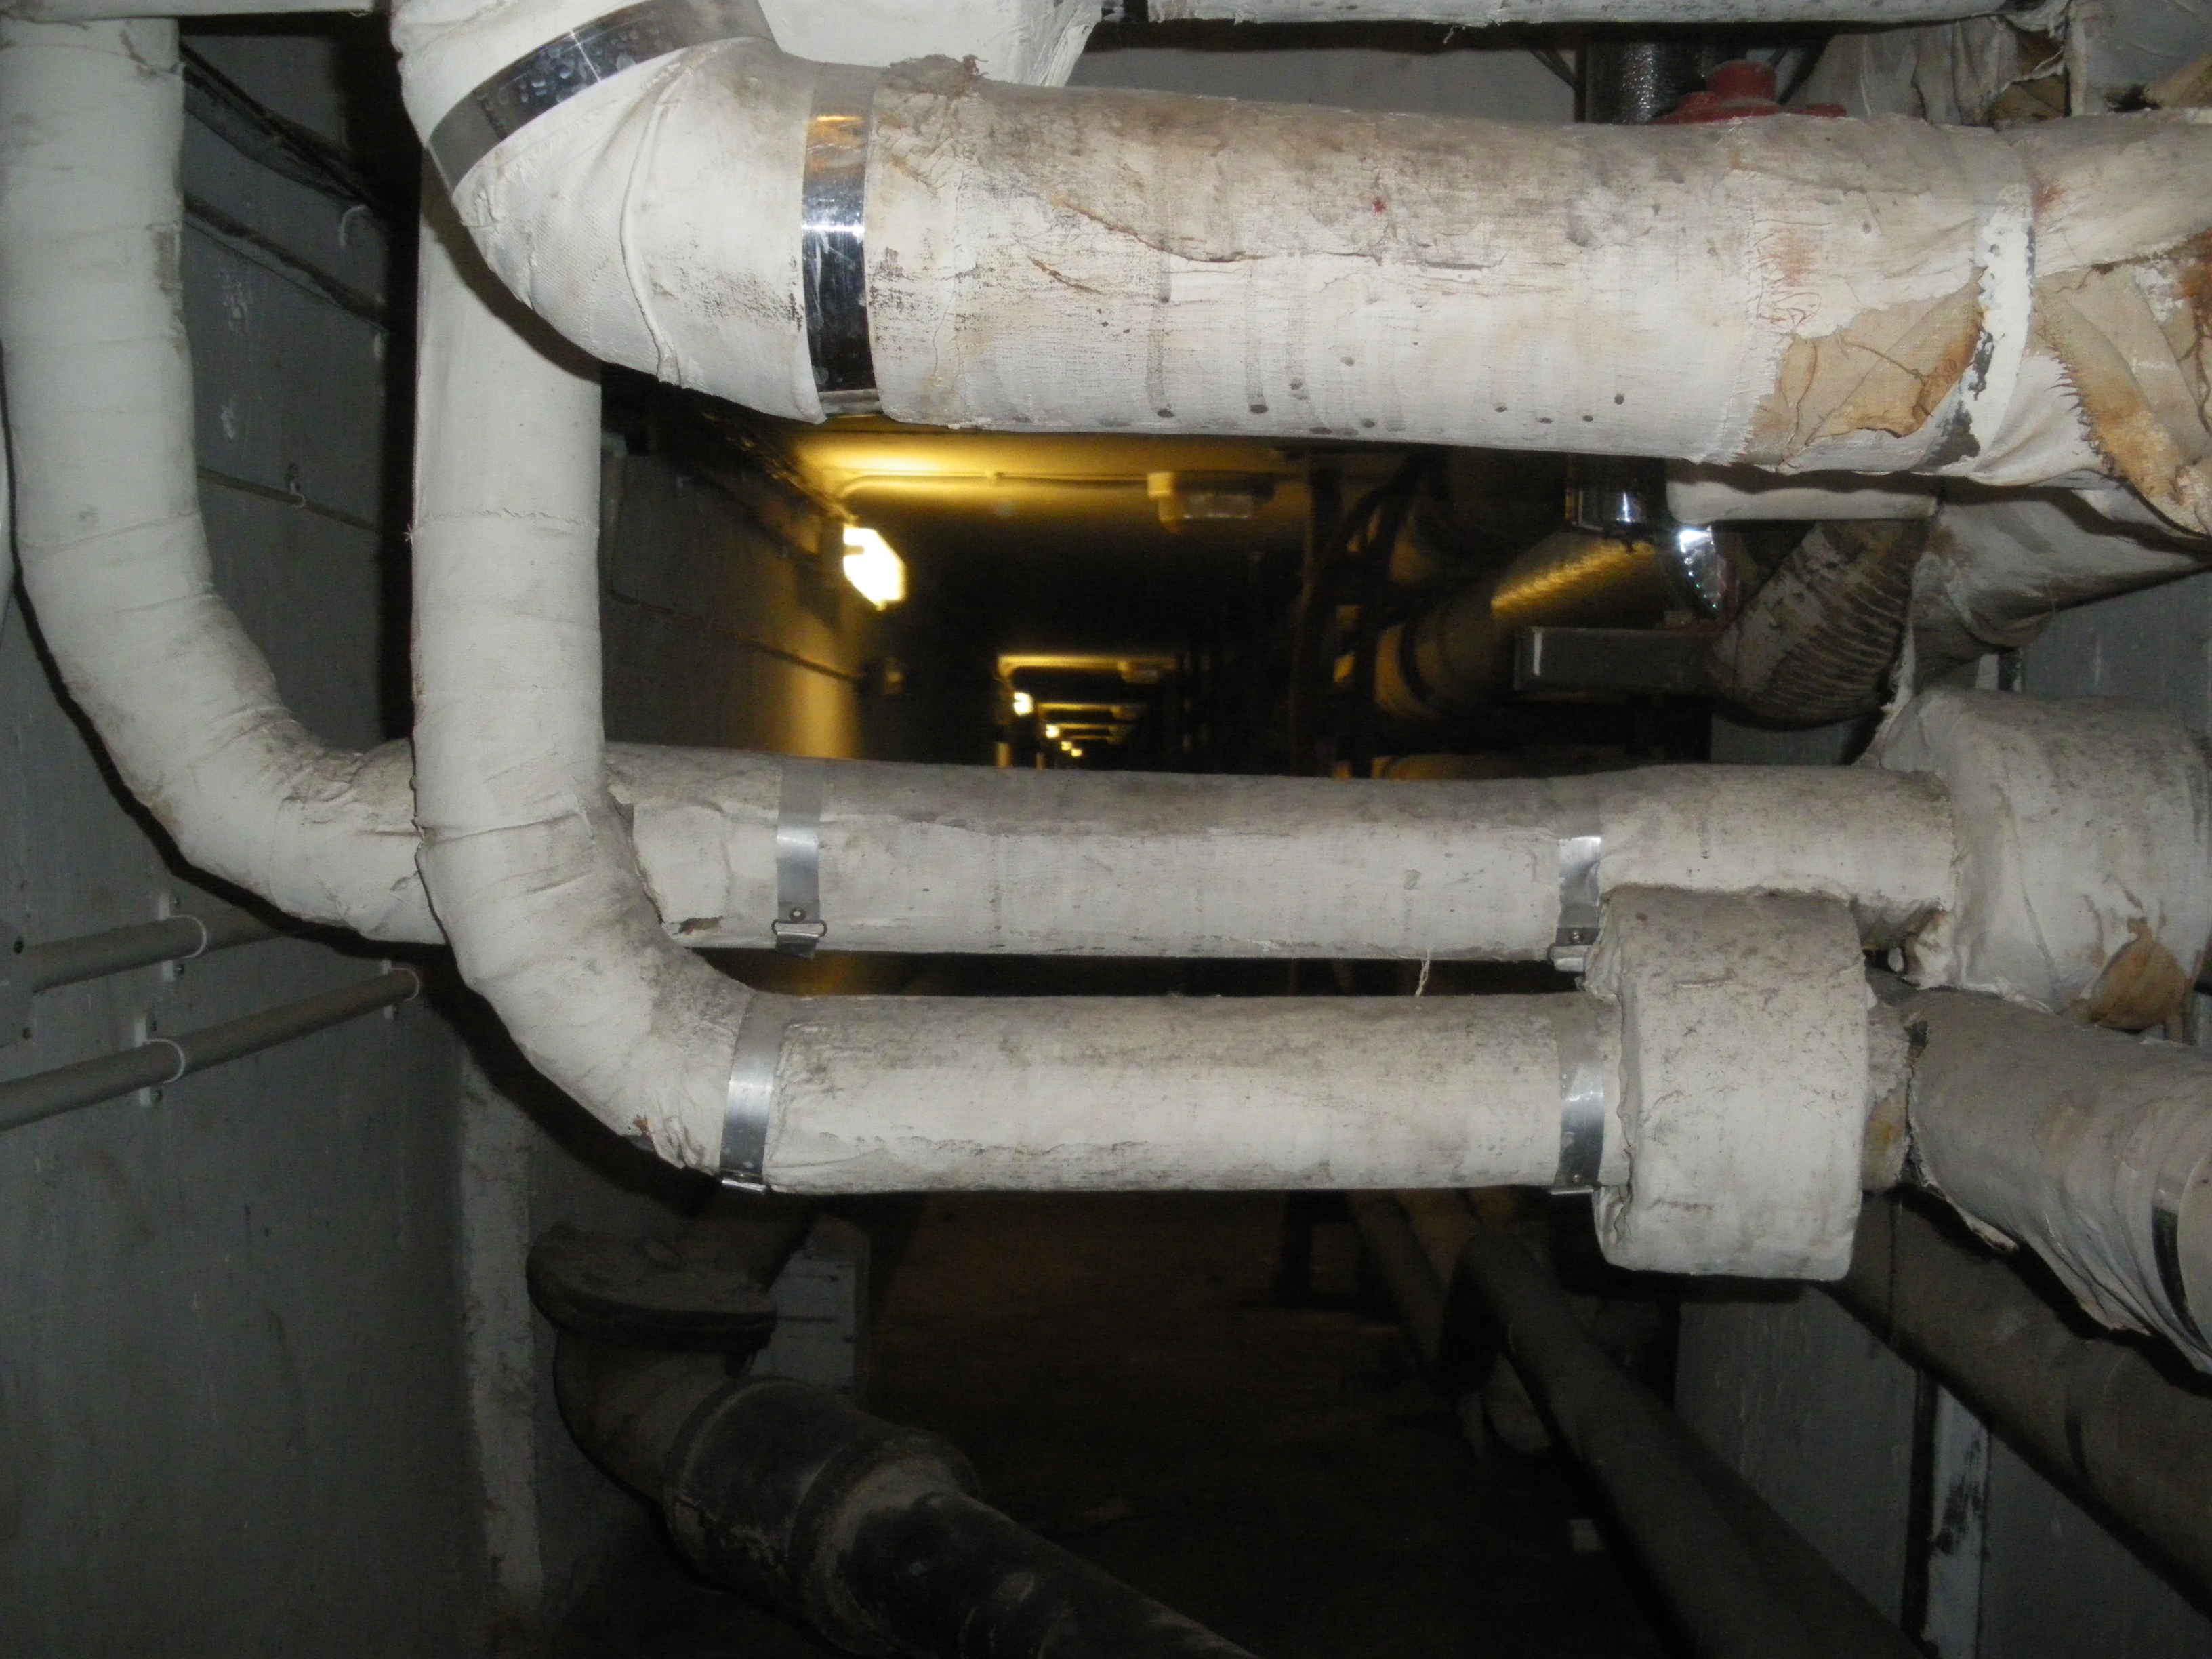 Duct at LG floor level between H core and K core